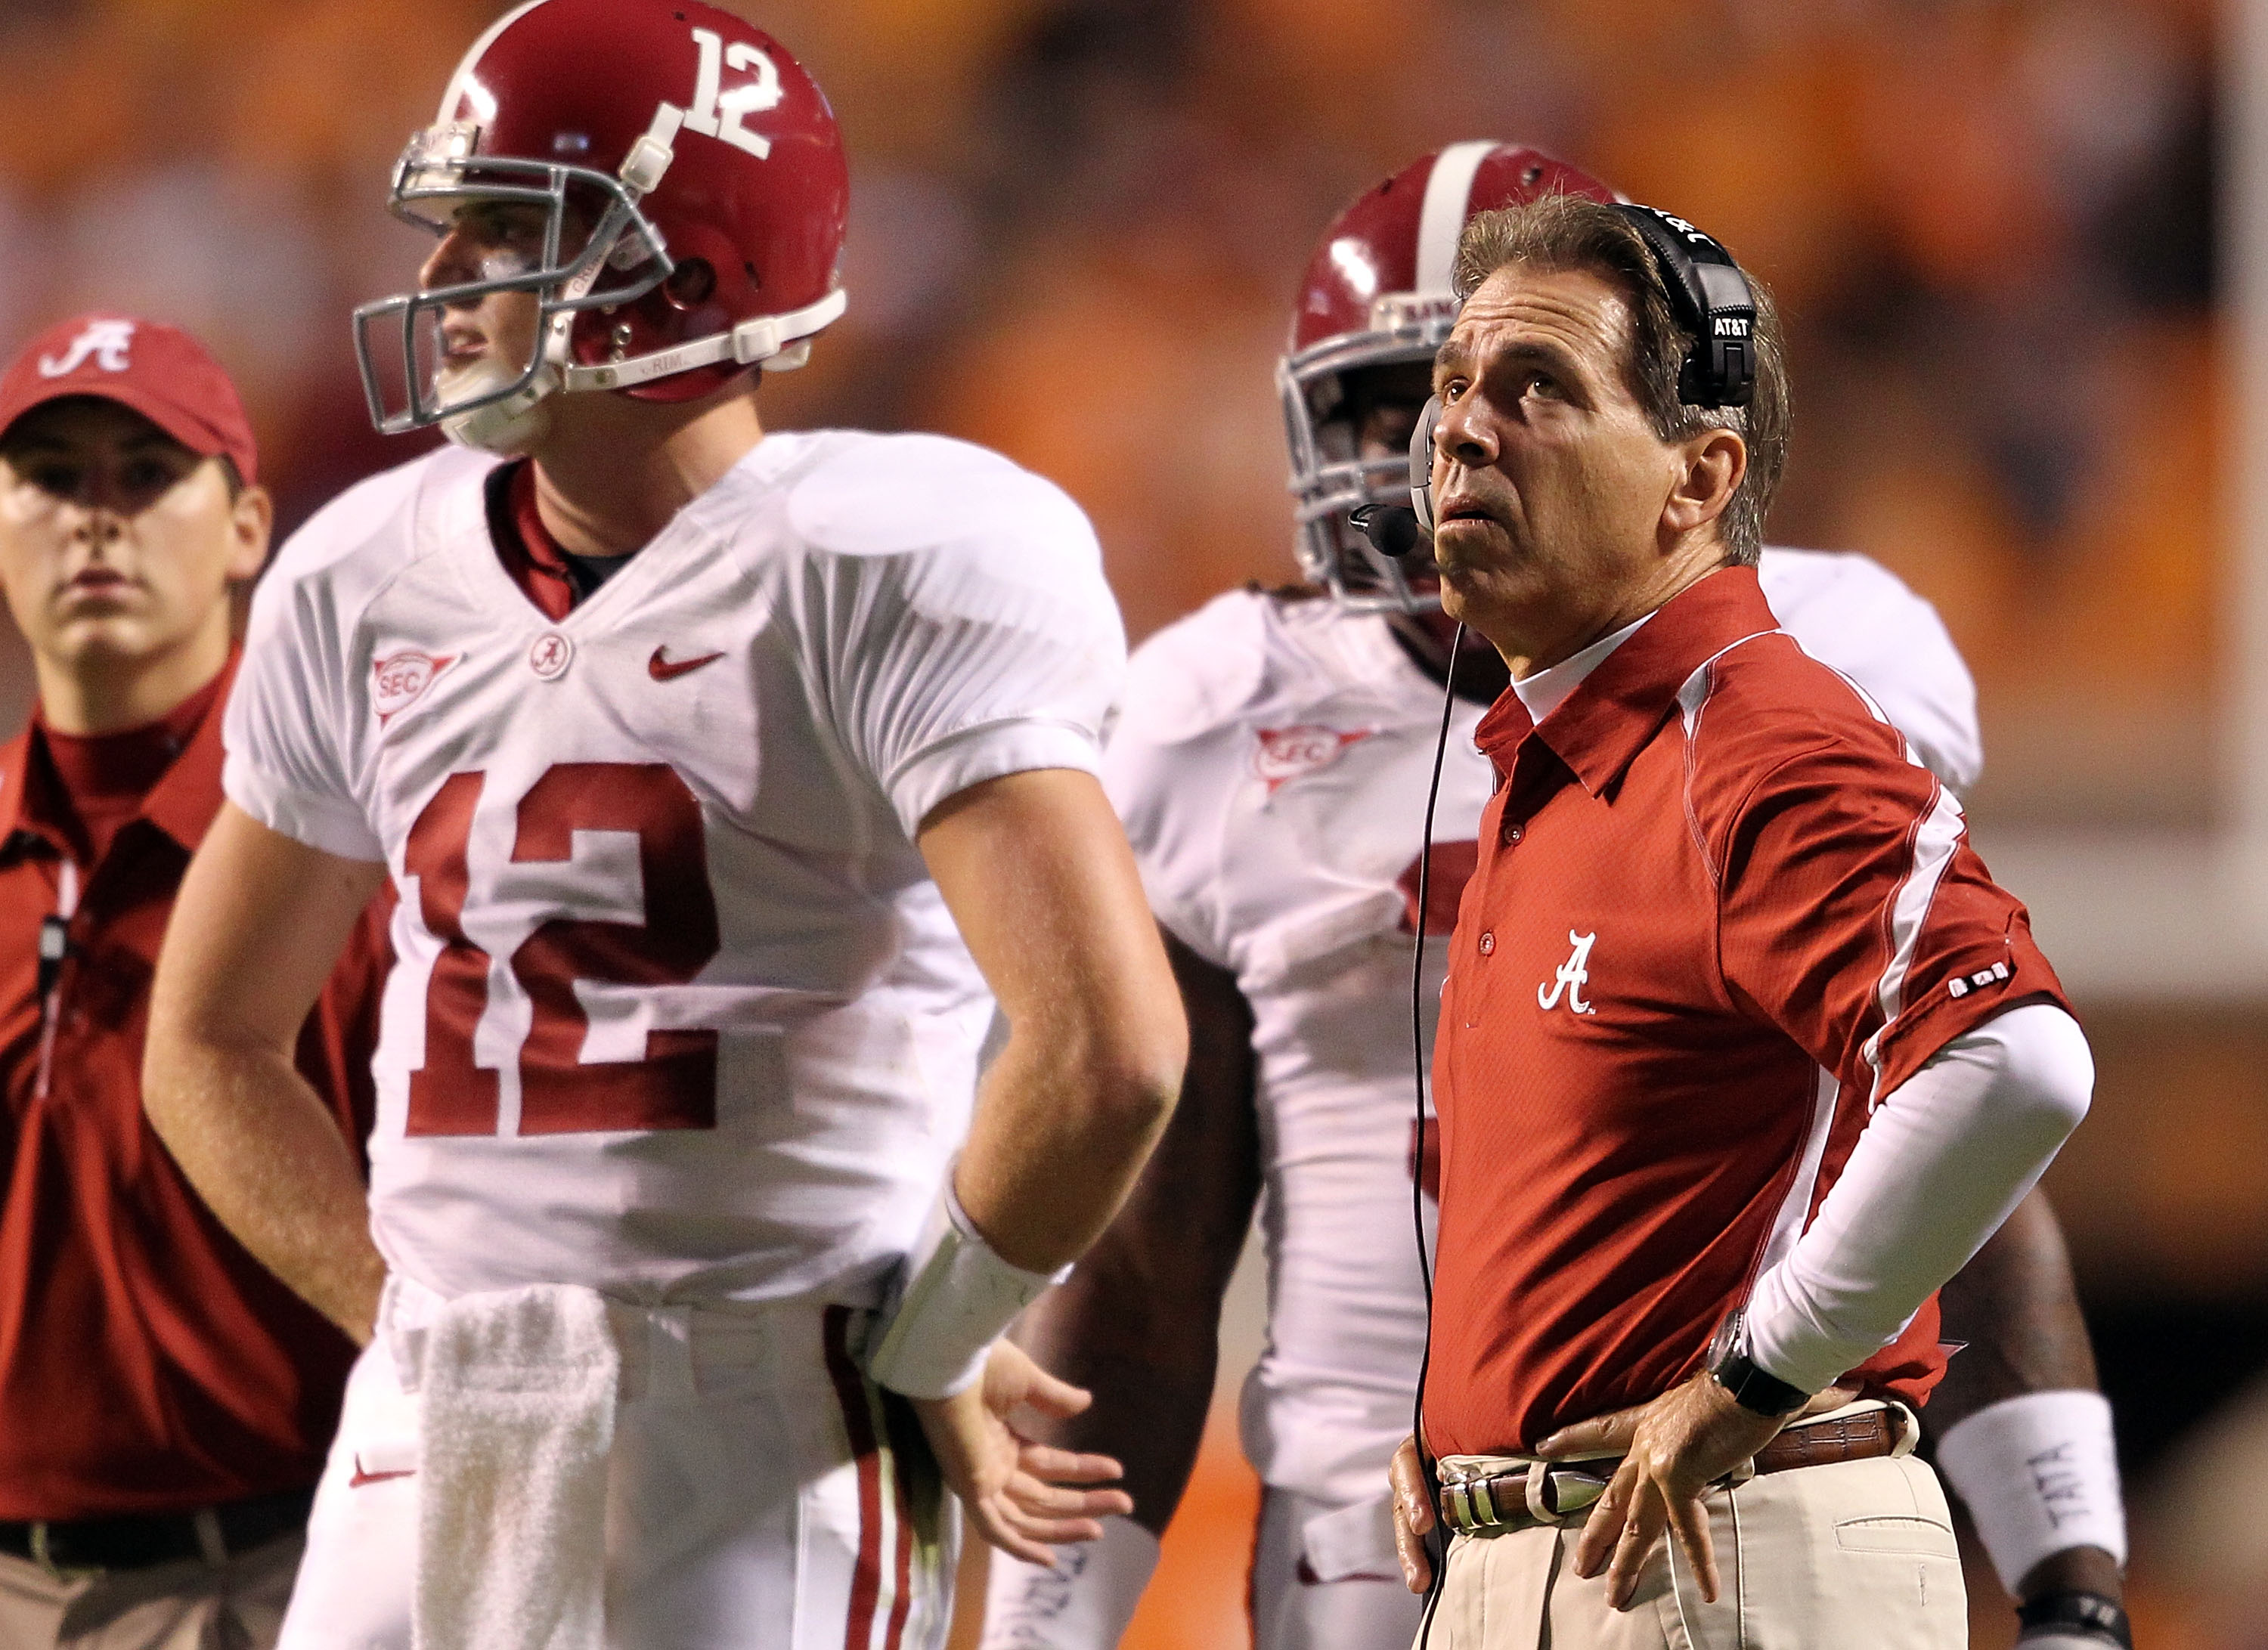 KNOXVILLE, TN - OCTOBER 23: Greg McElroy #12 and Nick Saban the Head Coach of the Alabama Crimson Tide are pictured during a timeout in the SEC game against the Tennessee Volunteers at Neyland Stadium on October 23, 2010 in Knoxville, Tennessee.  (Photo b